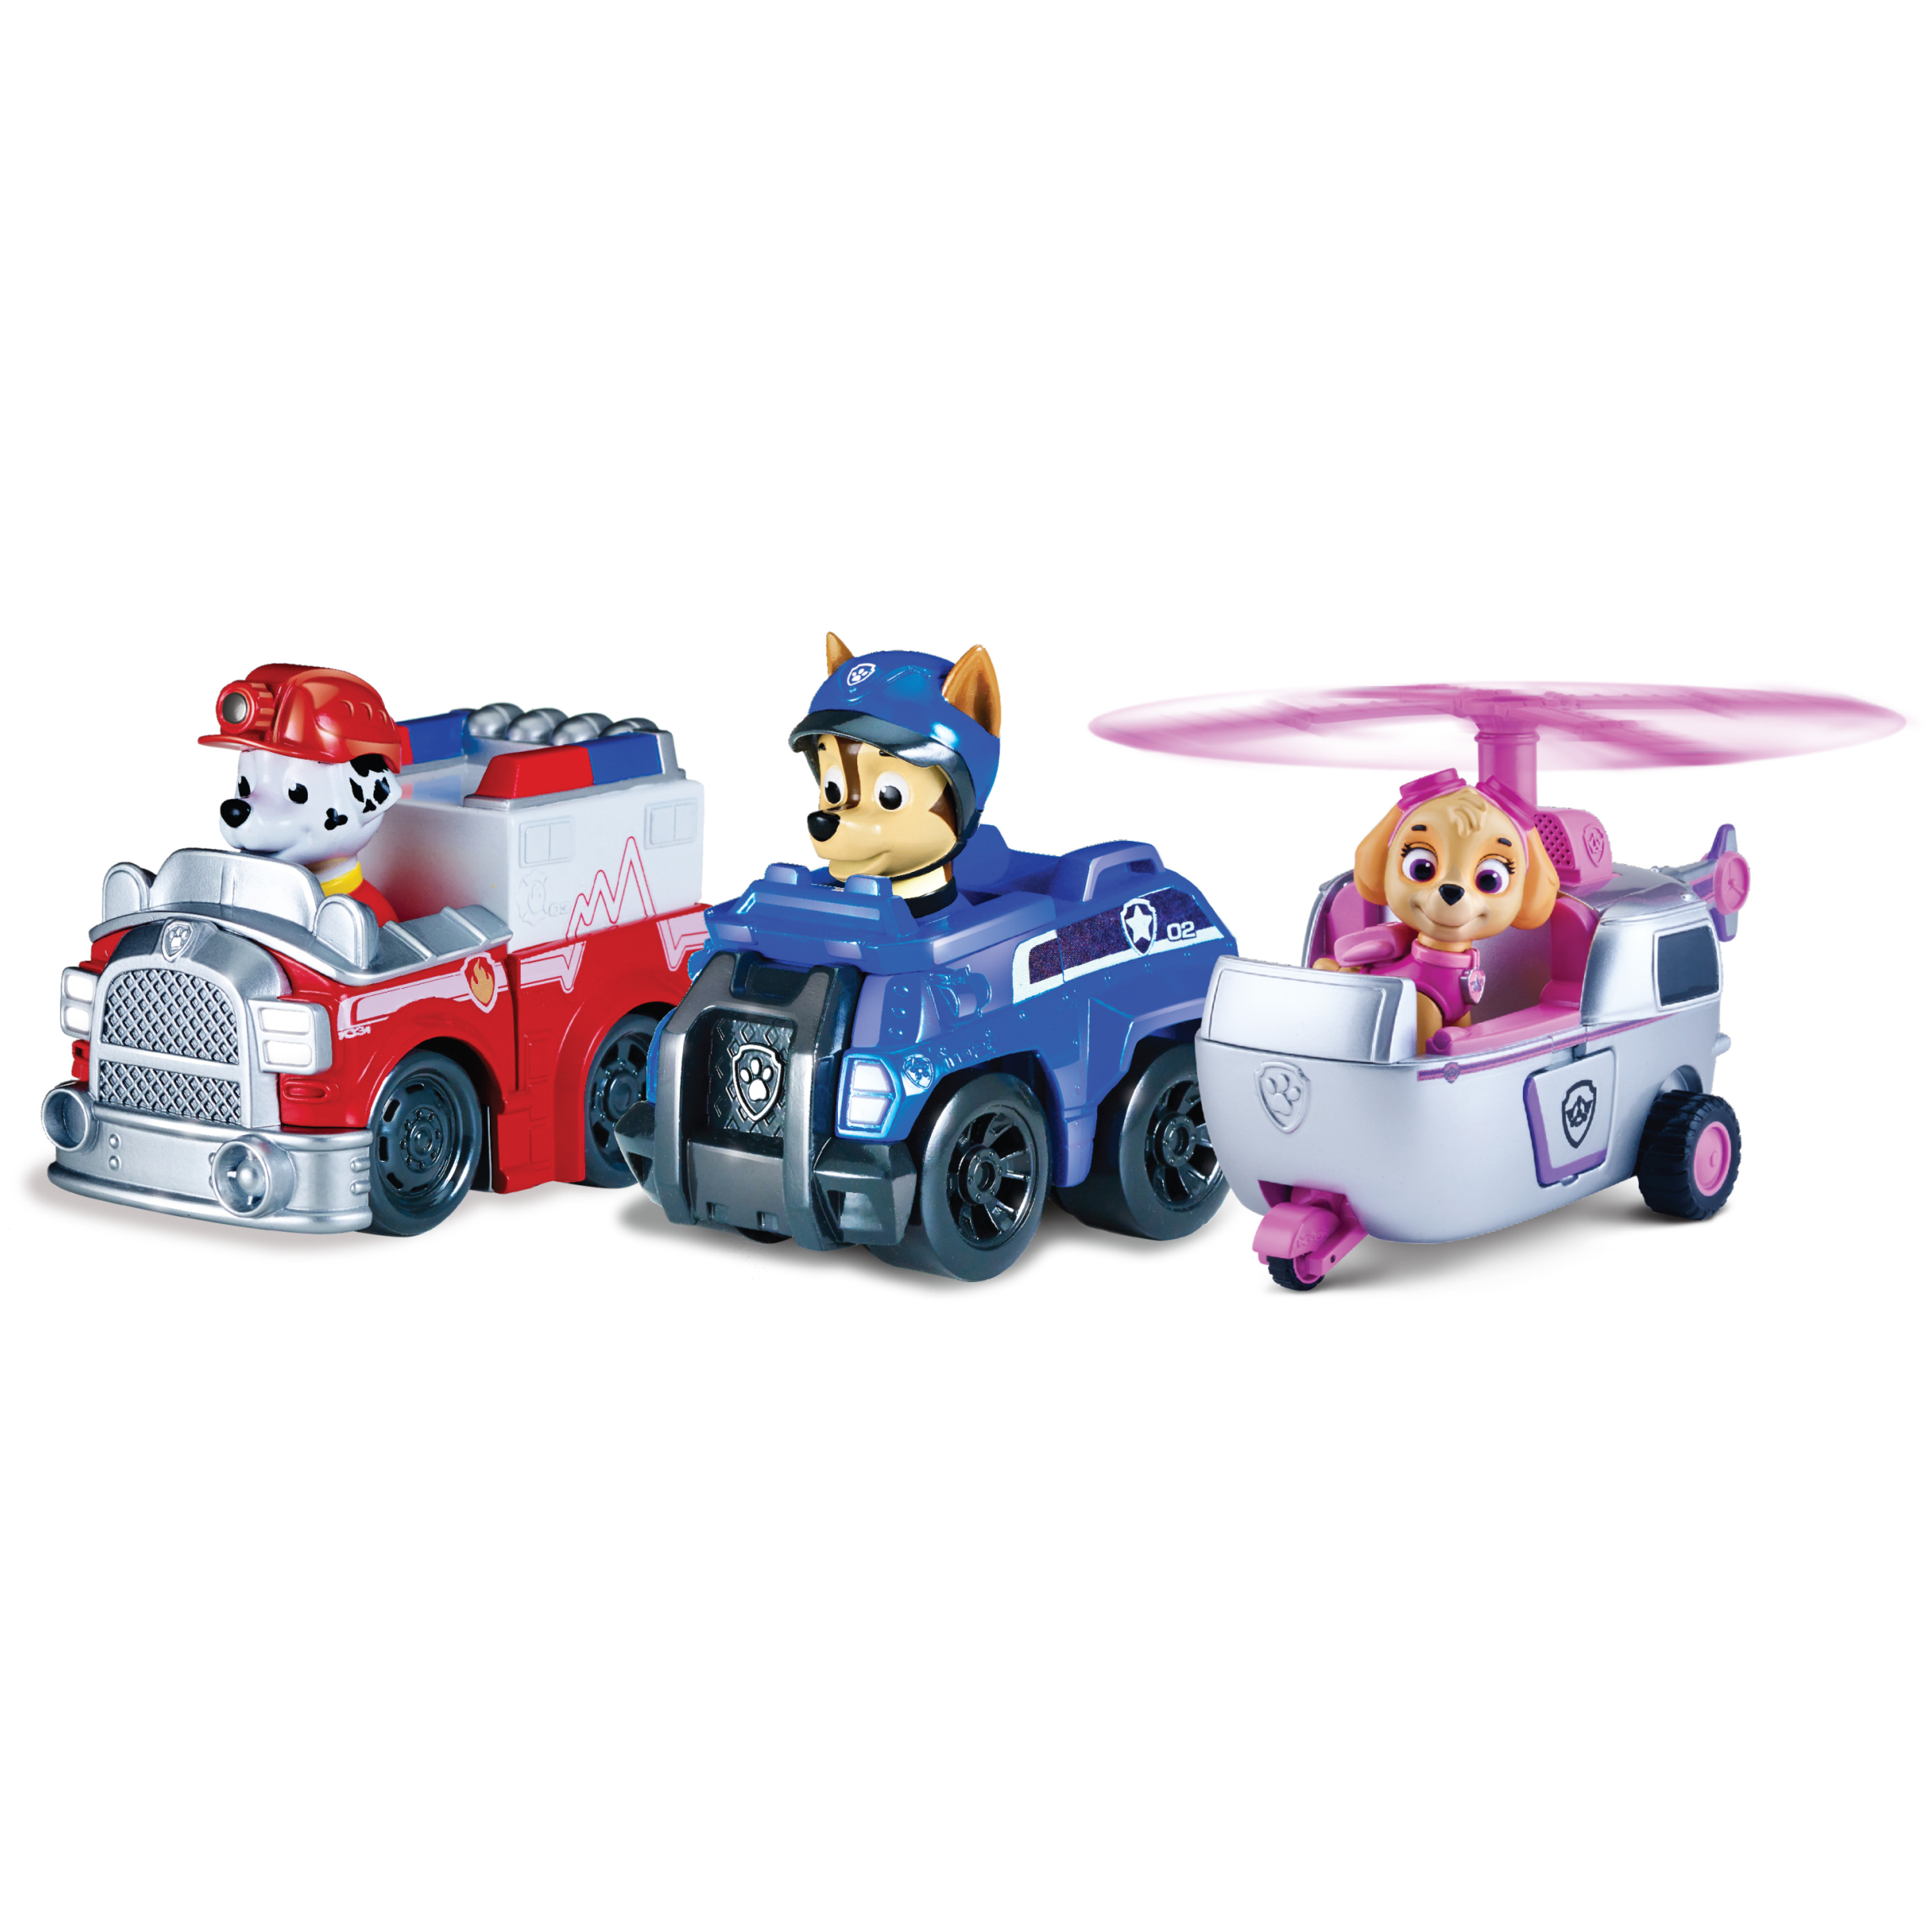 PAW Patrol Rescue Racers Vehicle and FIgure 3-Pack, For Ages - image 1 of 4